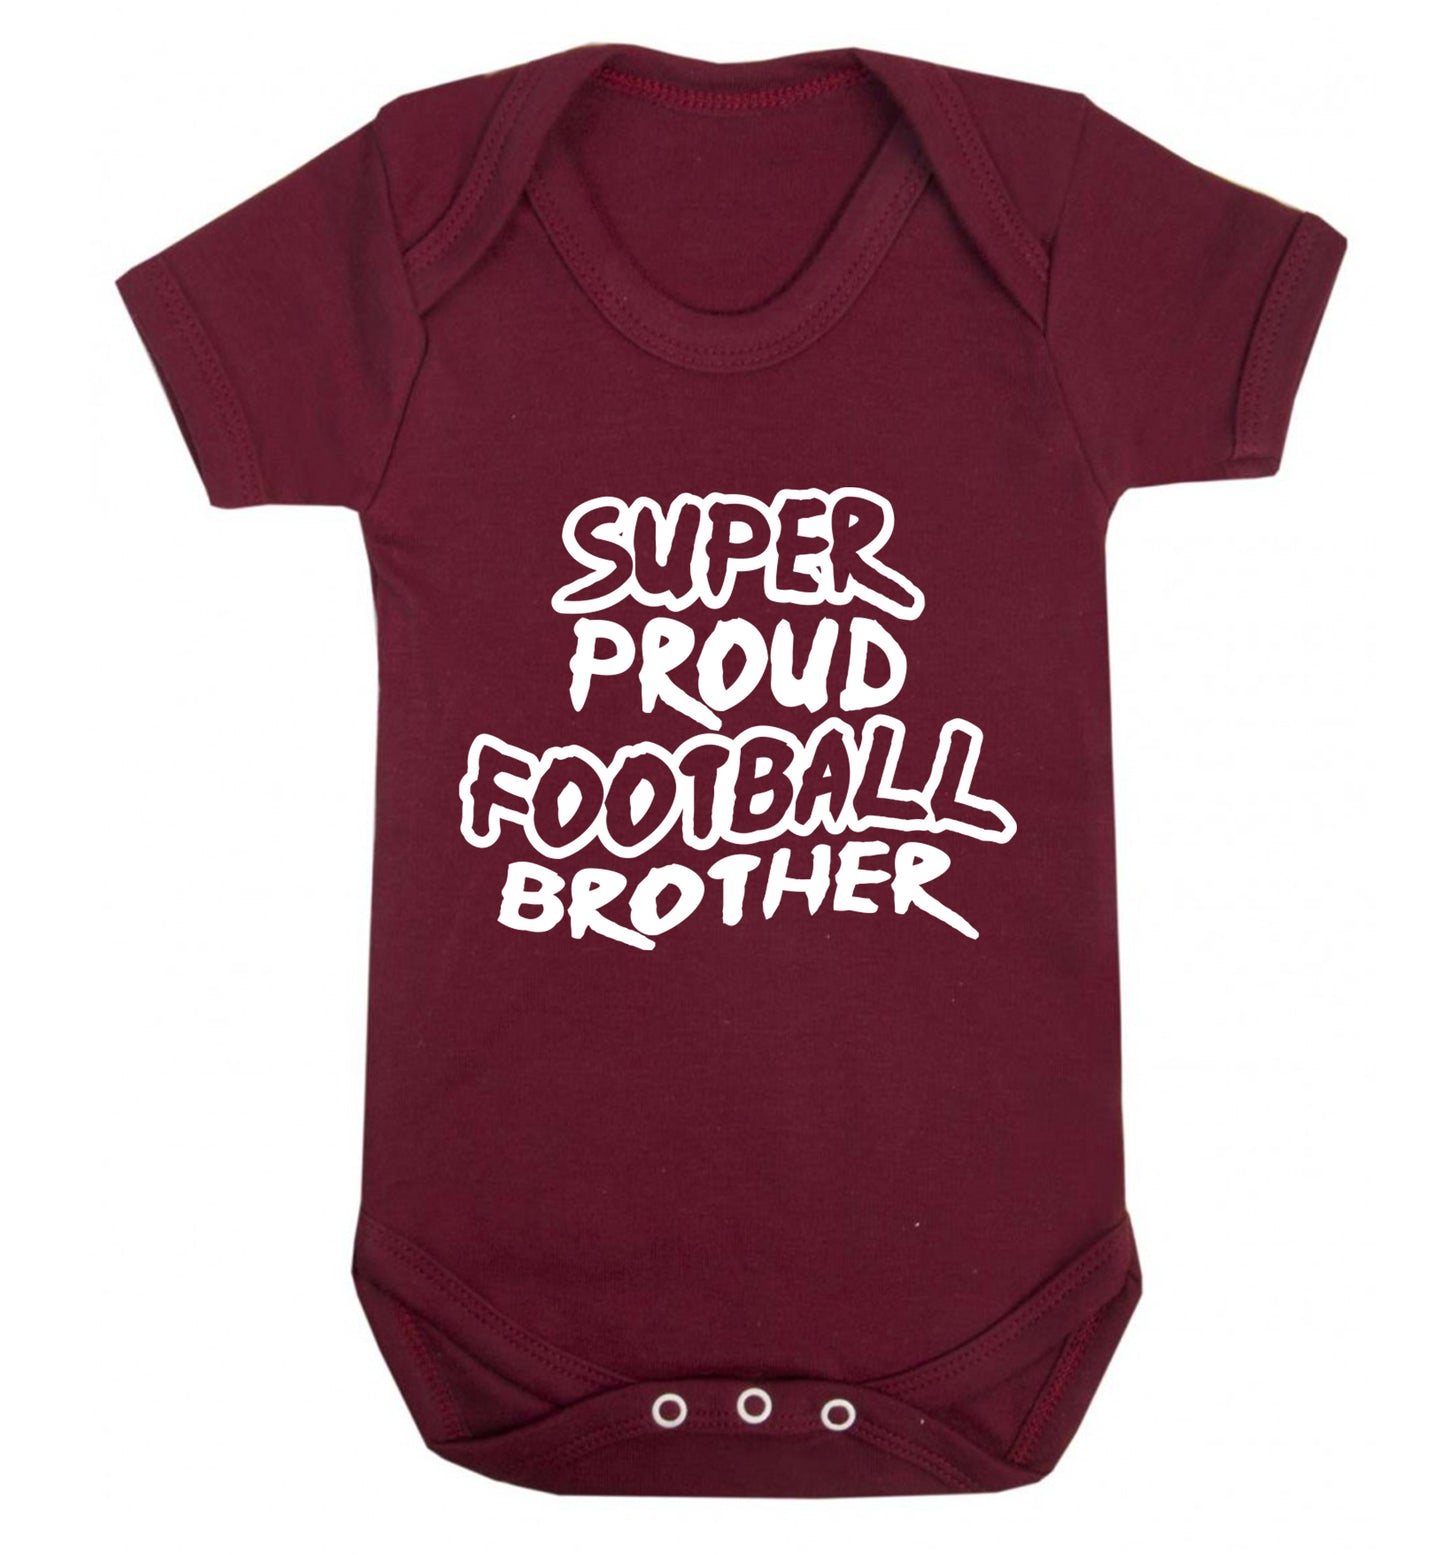 Super proud football brother Baby Vest maroon 18-24 months